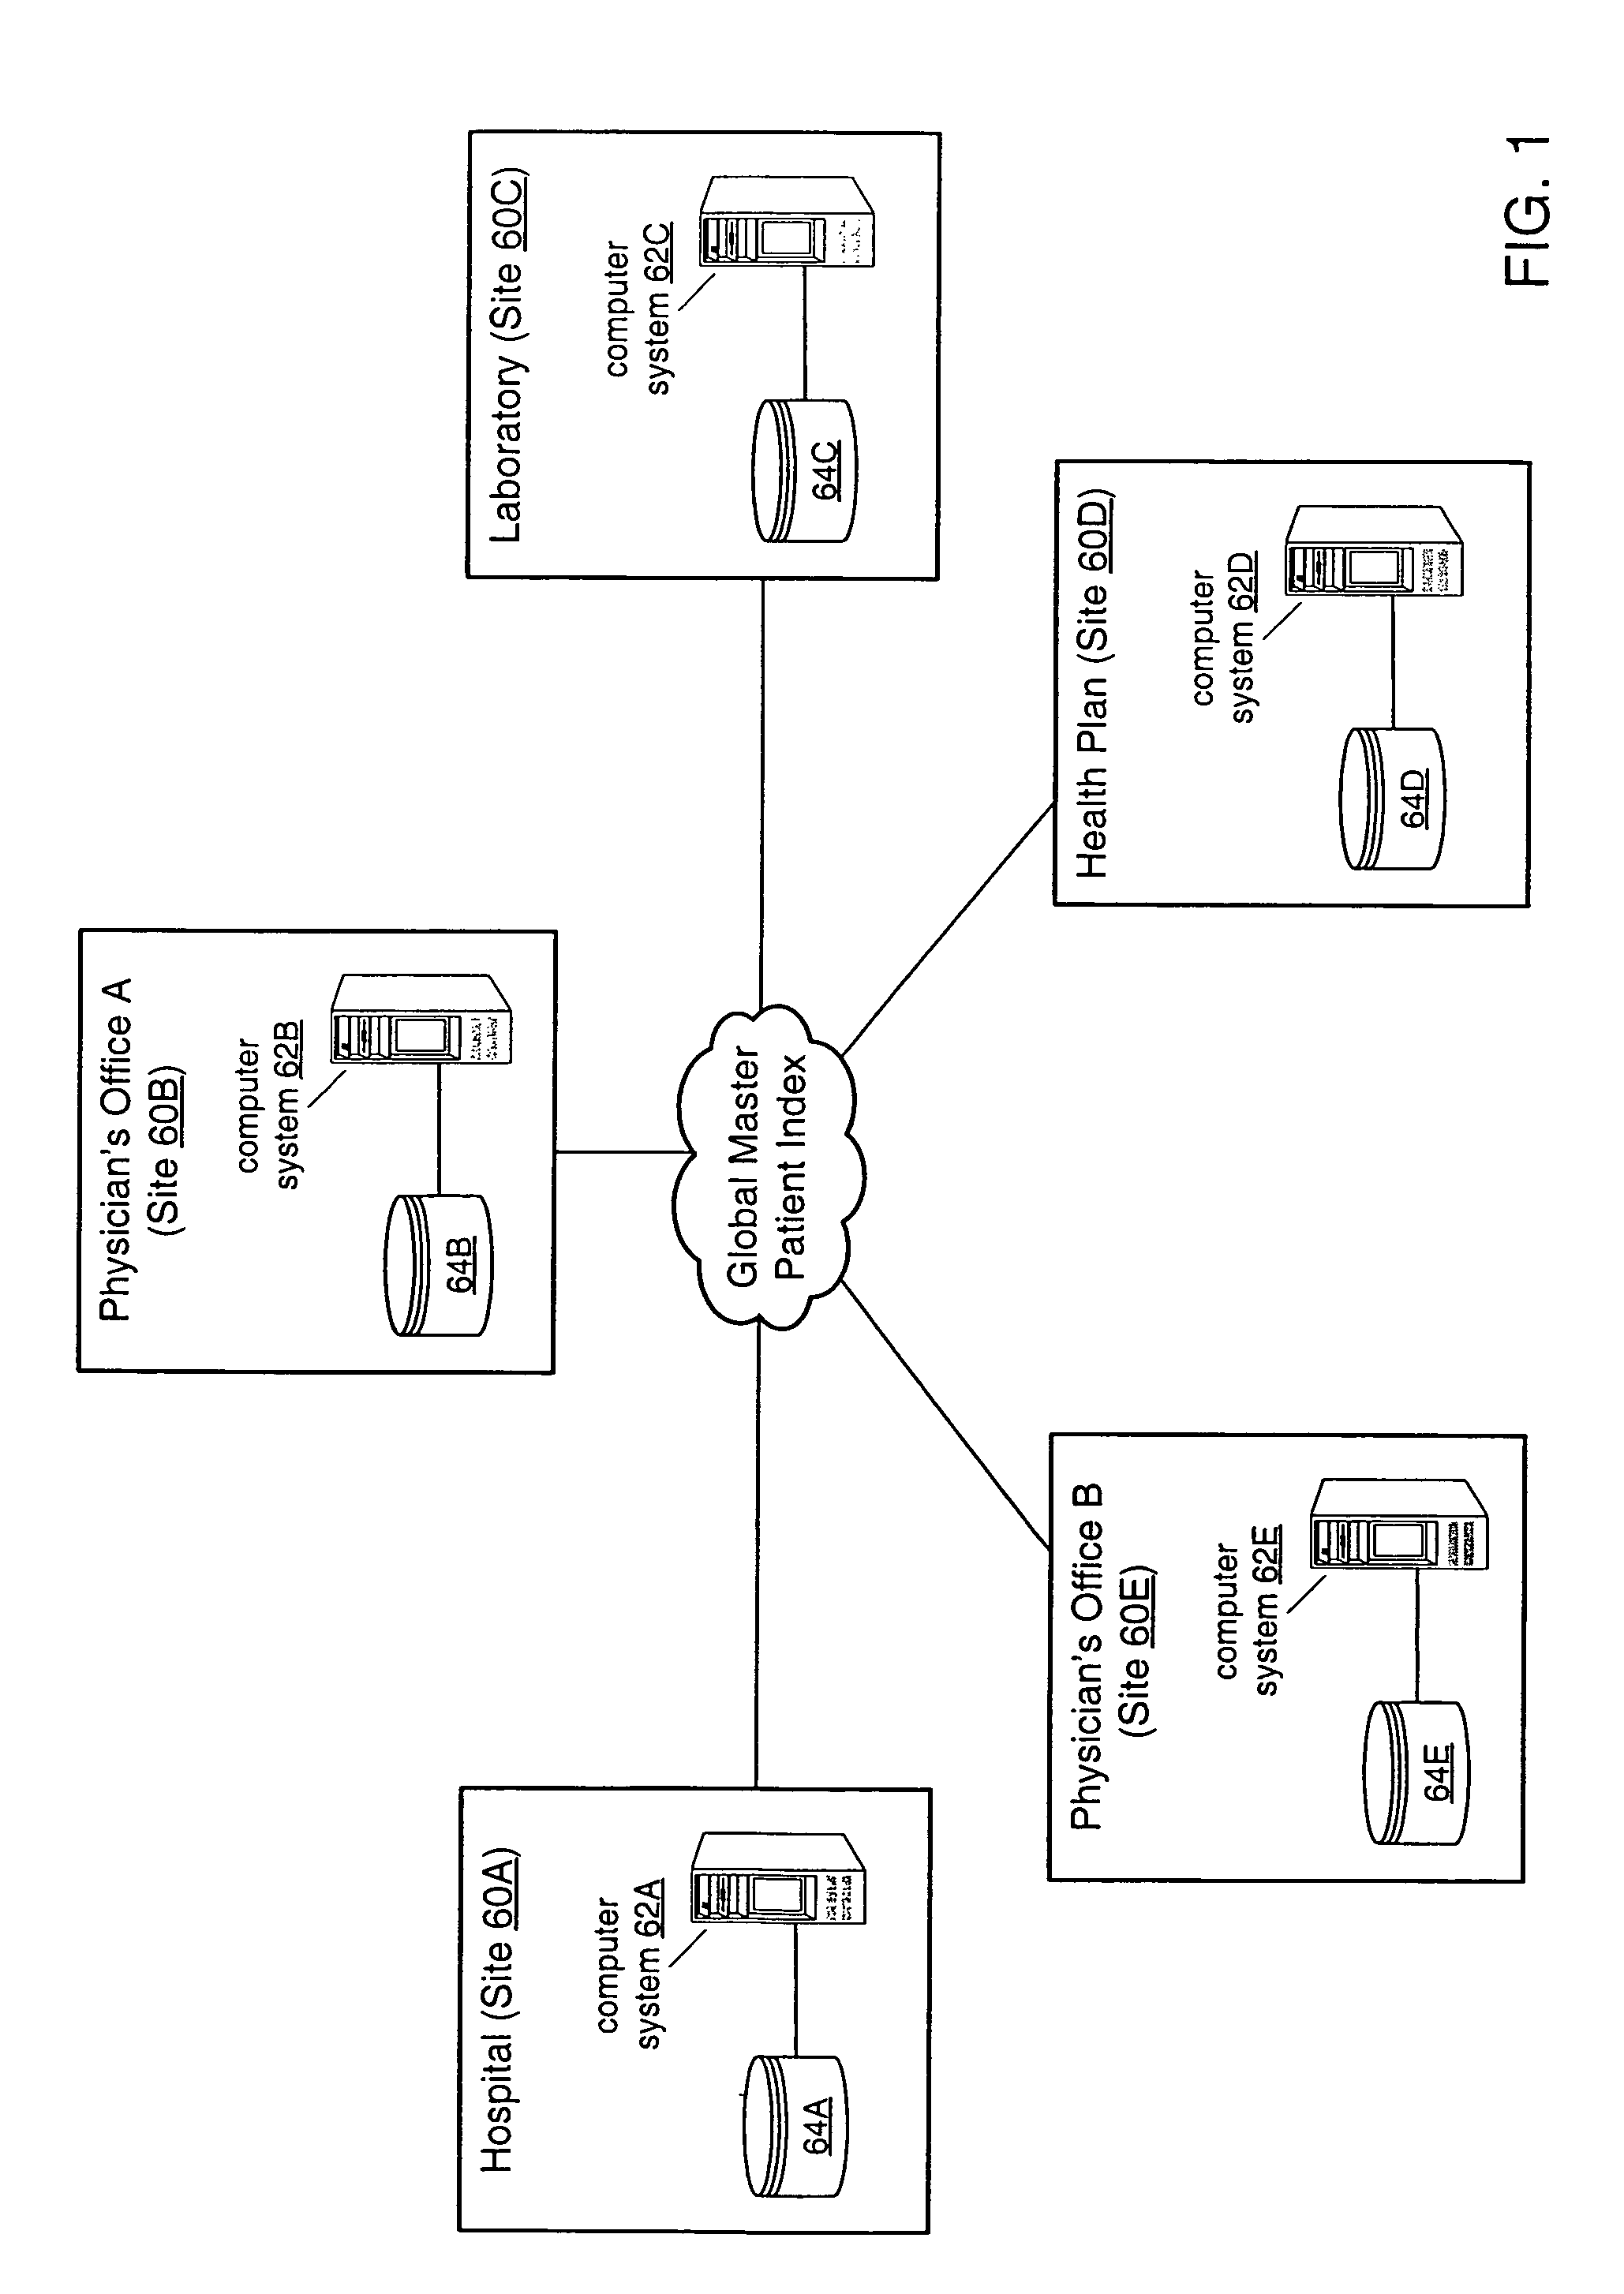 System and method for implementing a global master patient index